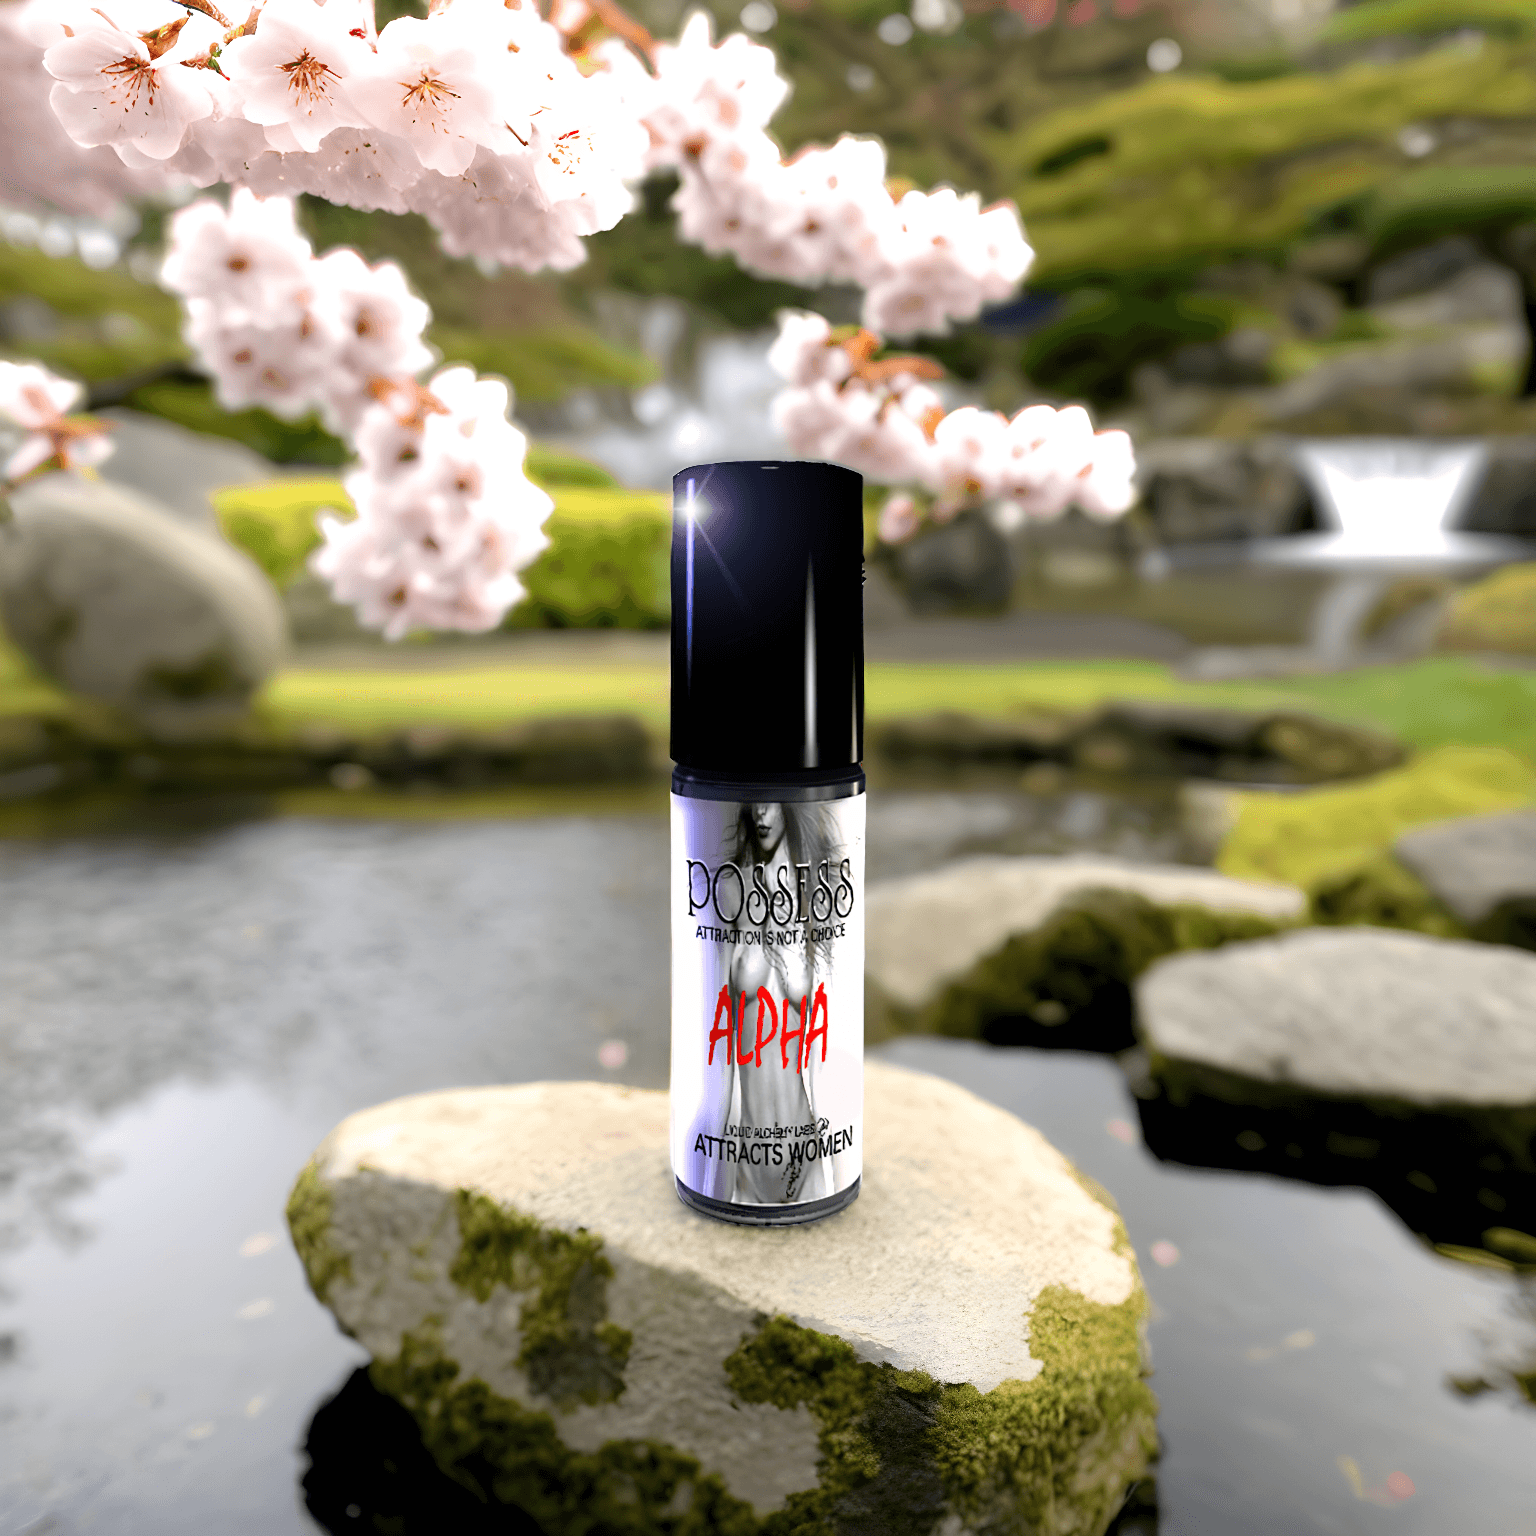 POSSESS ALPHA™ pheromone cologne for men by Royal Pheromones, attracts women, with Androstenone formula for dominance, outdoors with cherry blossoms.